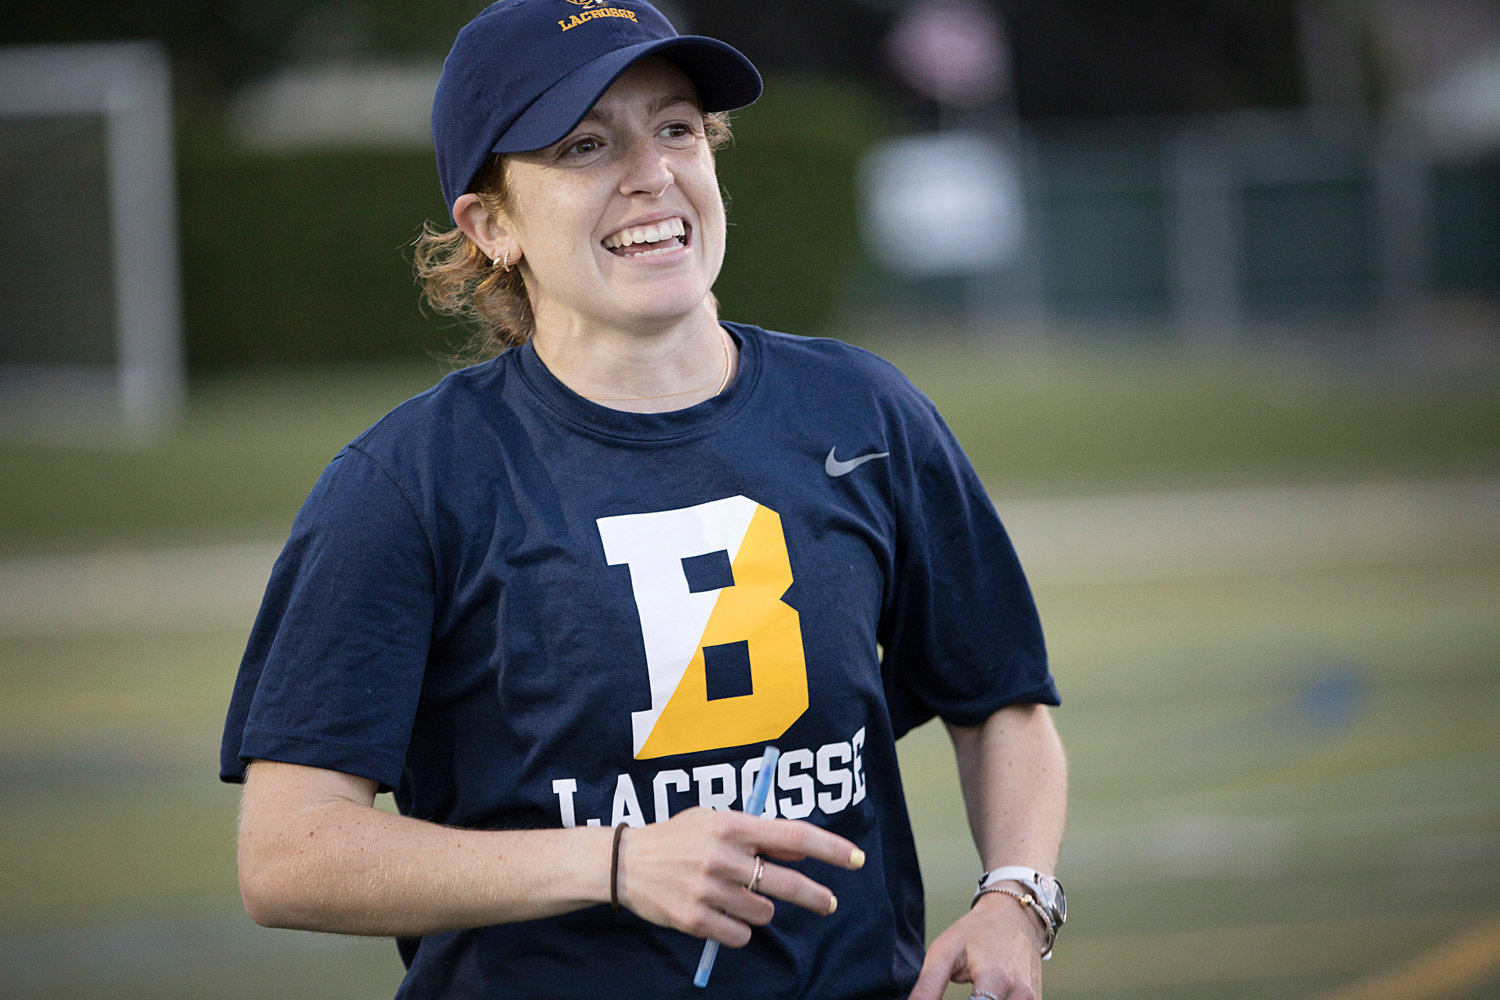 Coach Ariana Cambio was voted Coach of the Year for Rhode Island high school girls' lacrosse.